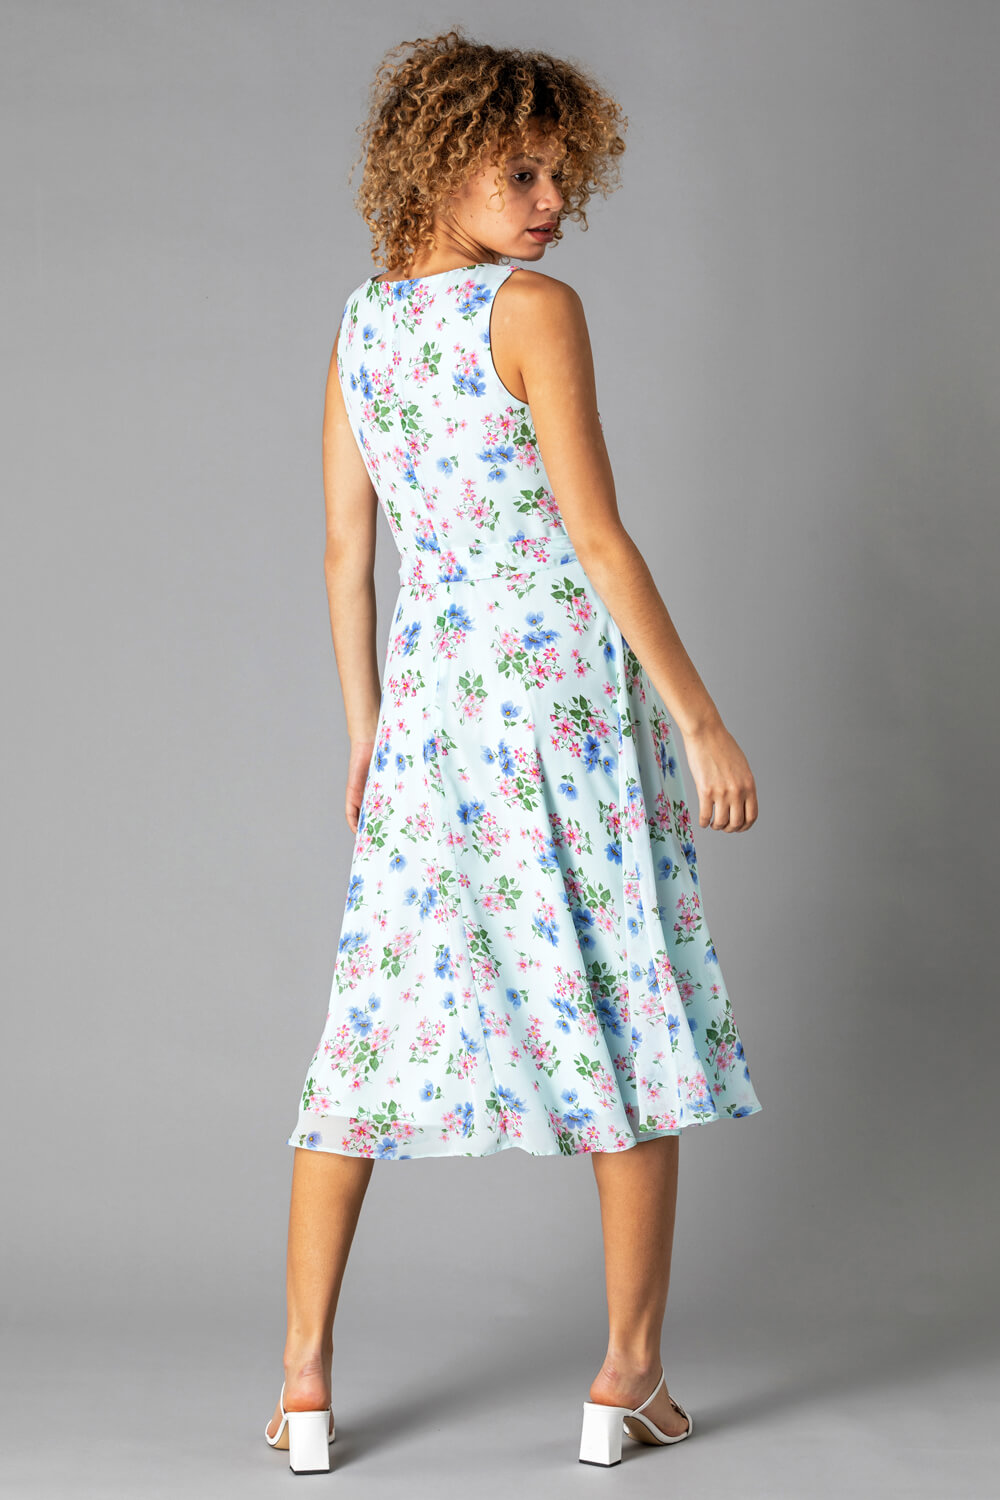 Blue Floral Fit & Flare Midi Dress, Image 2 of 4